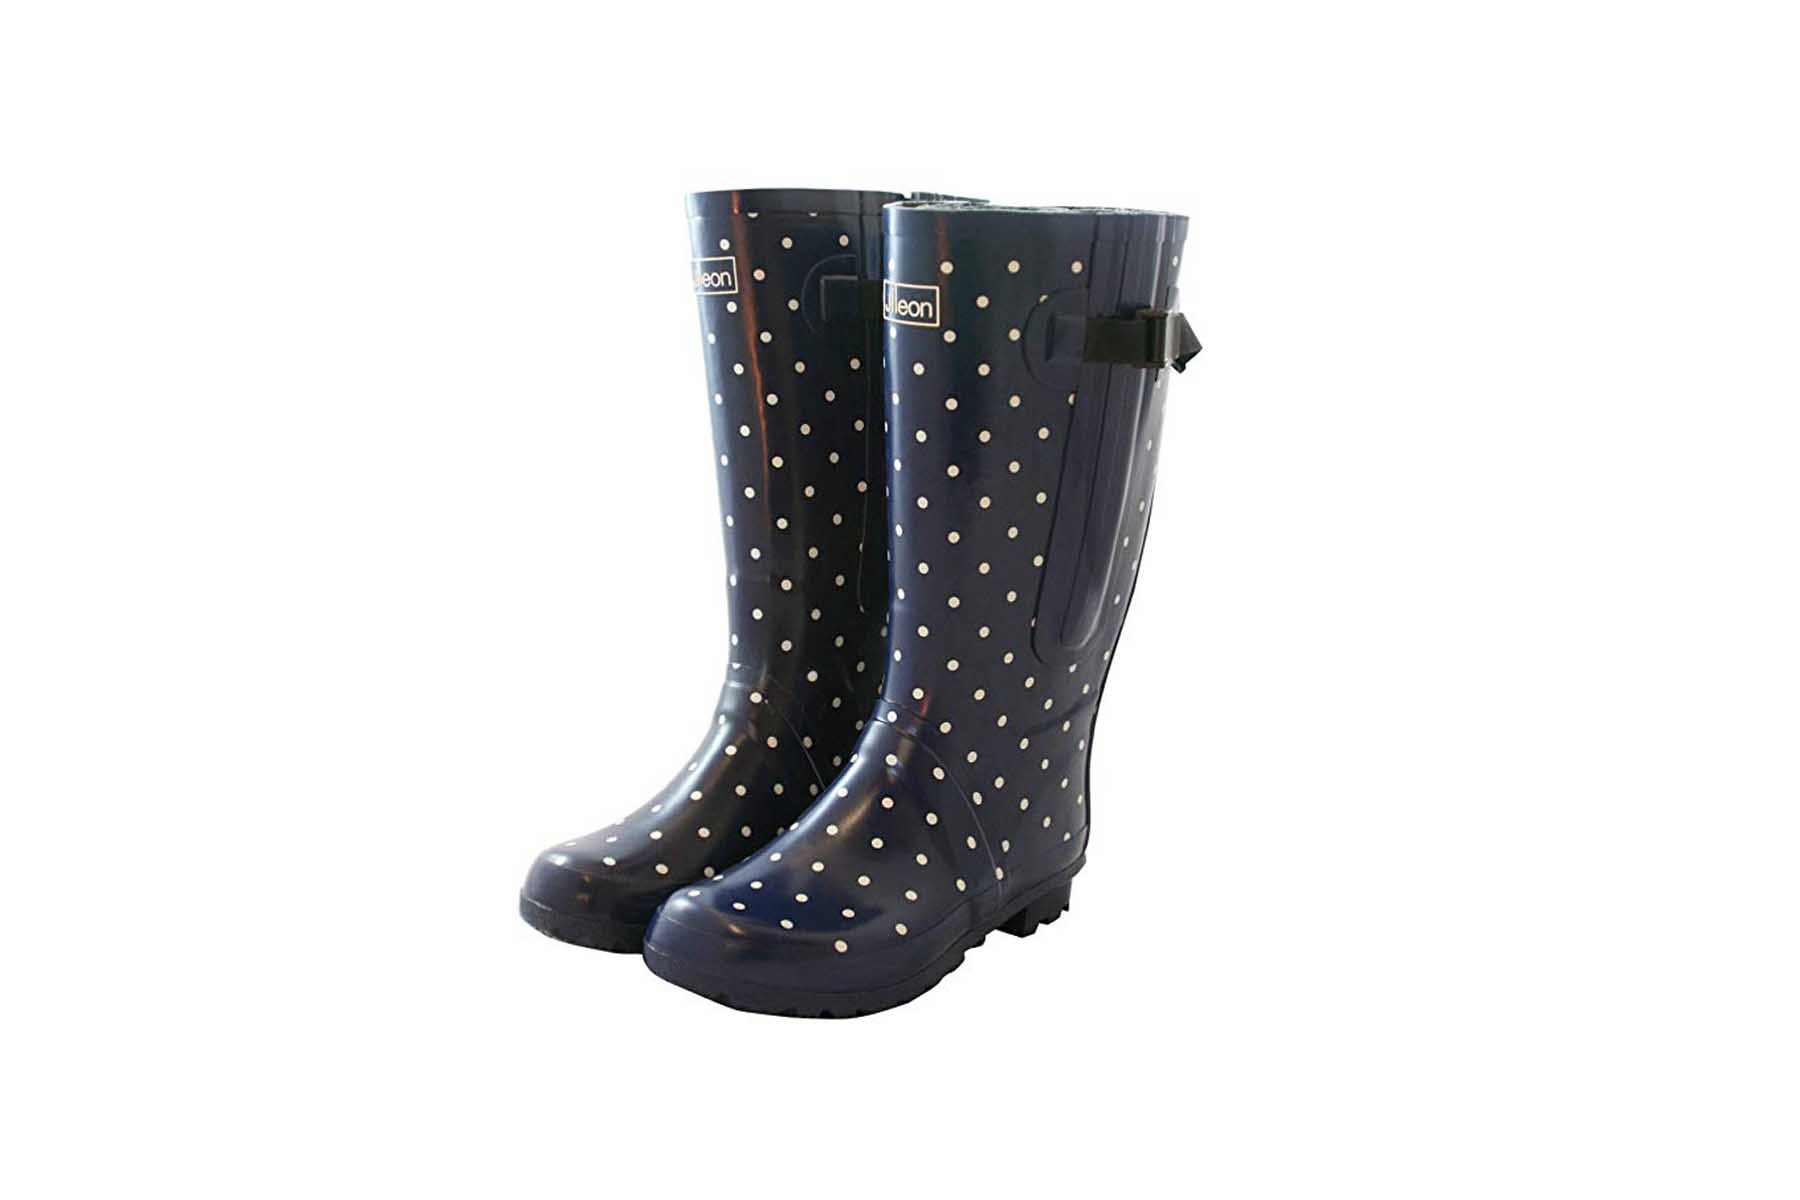 Best Rain Boots for Women With Wide Calves